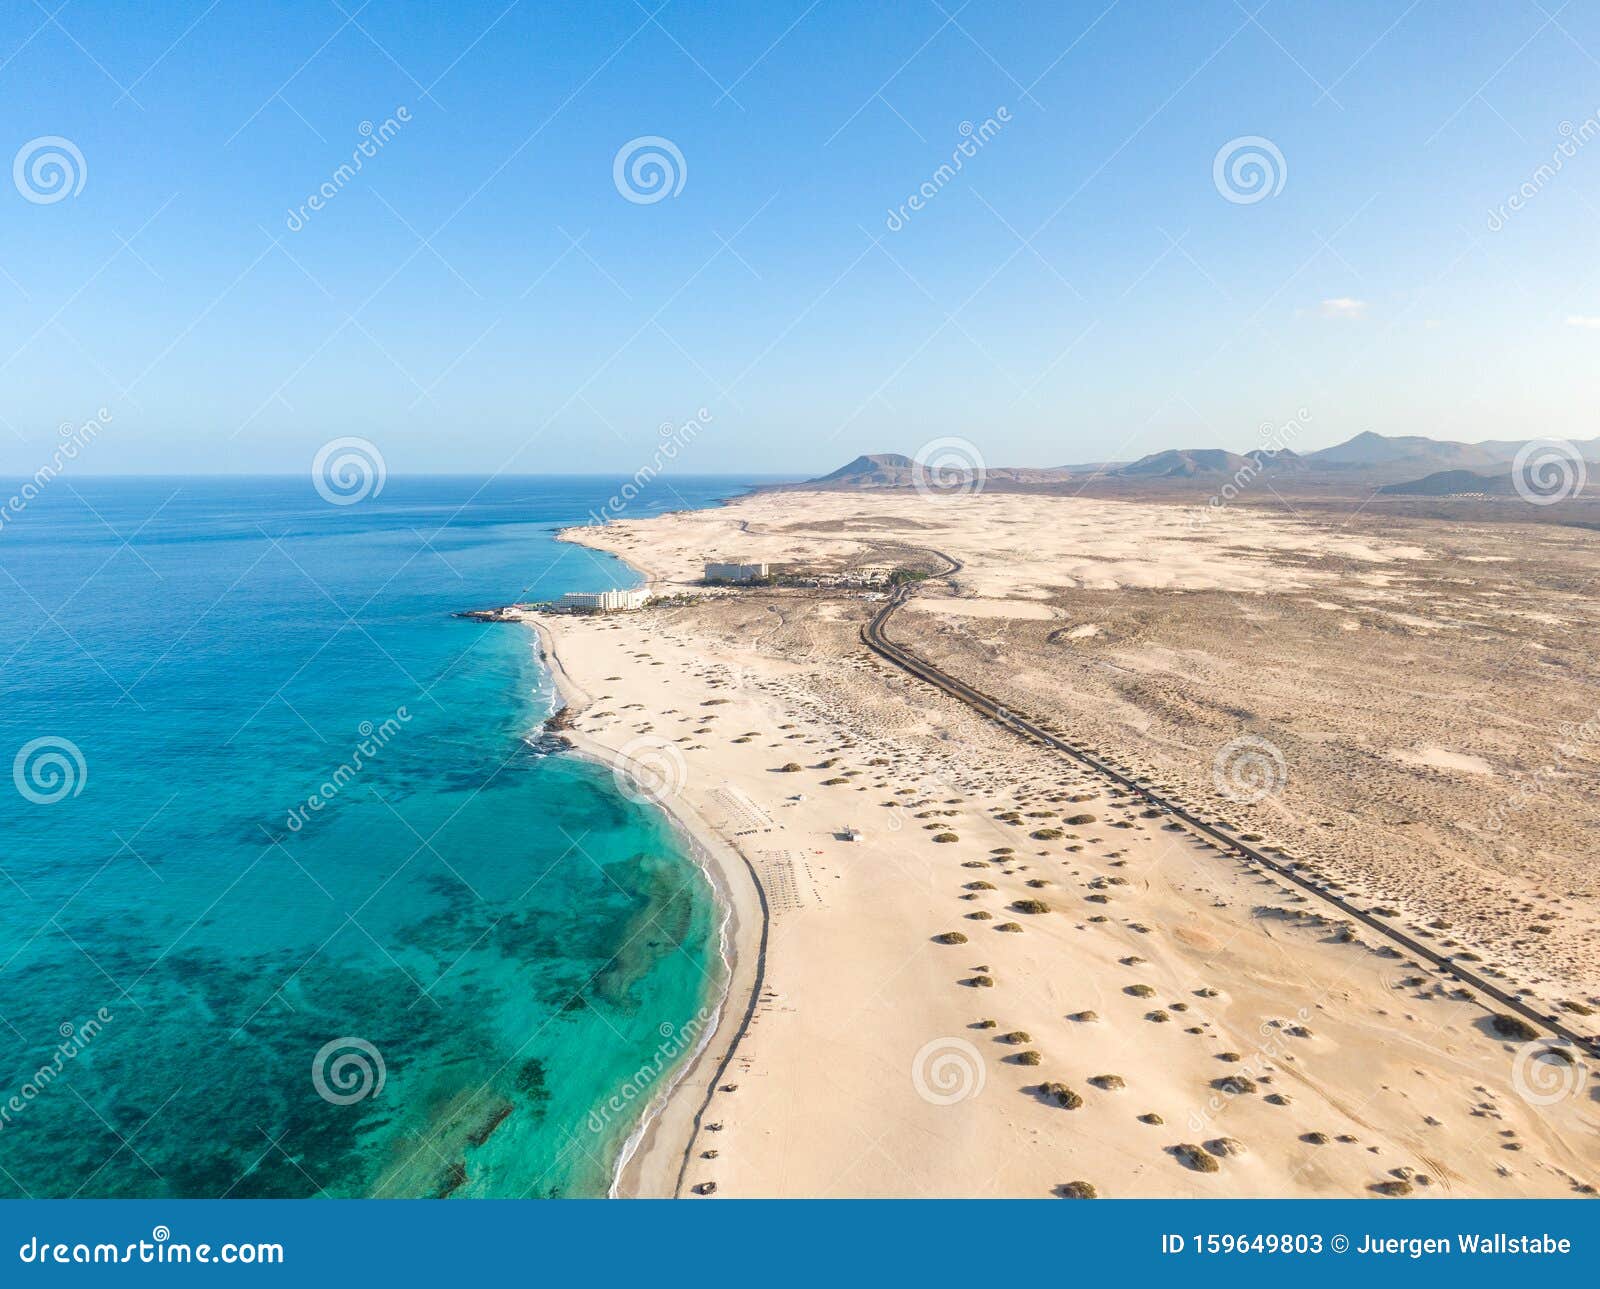 panoramic high angle aerial drone view of corralejo national park parque natural de corralejo with sand dunes